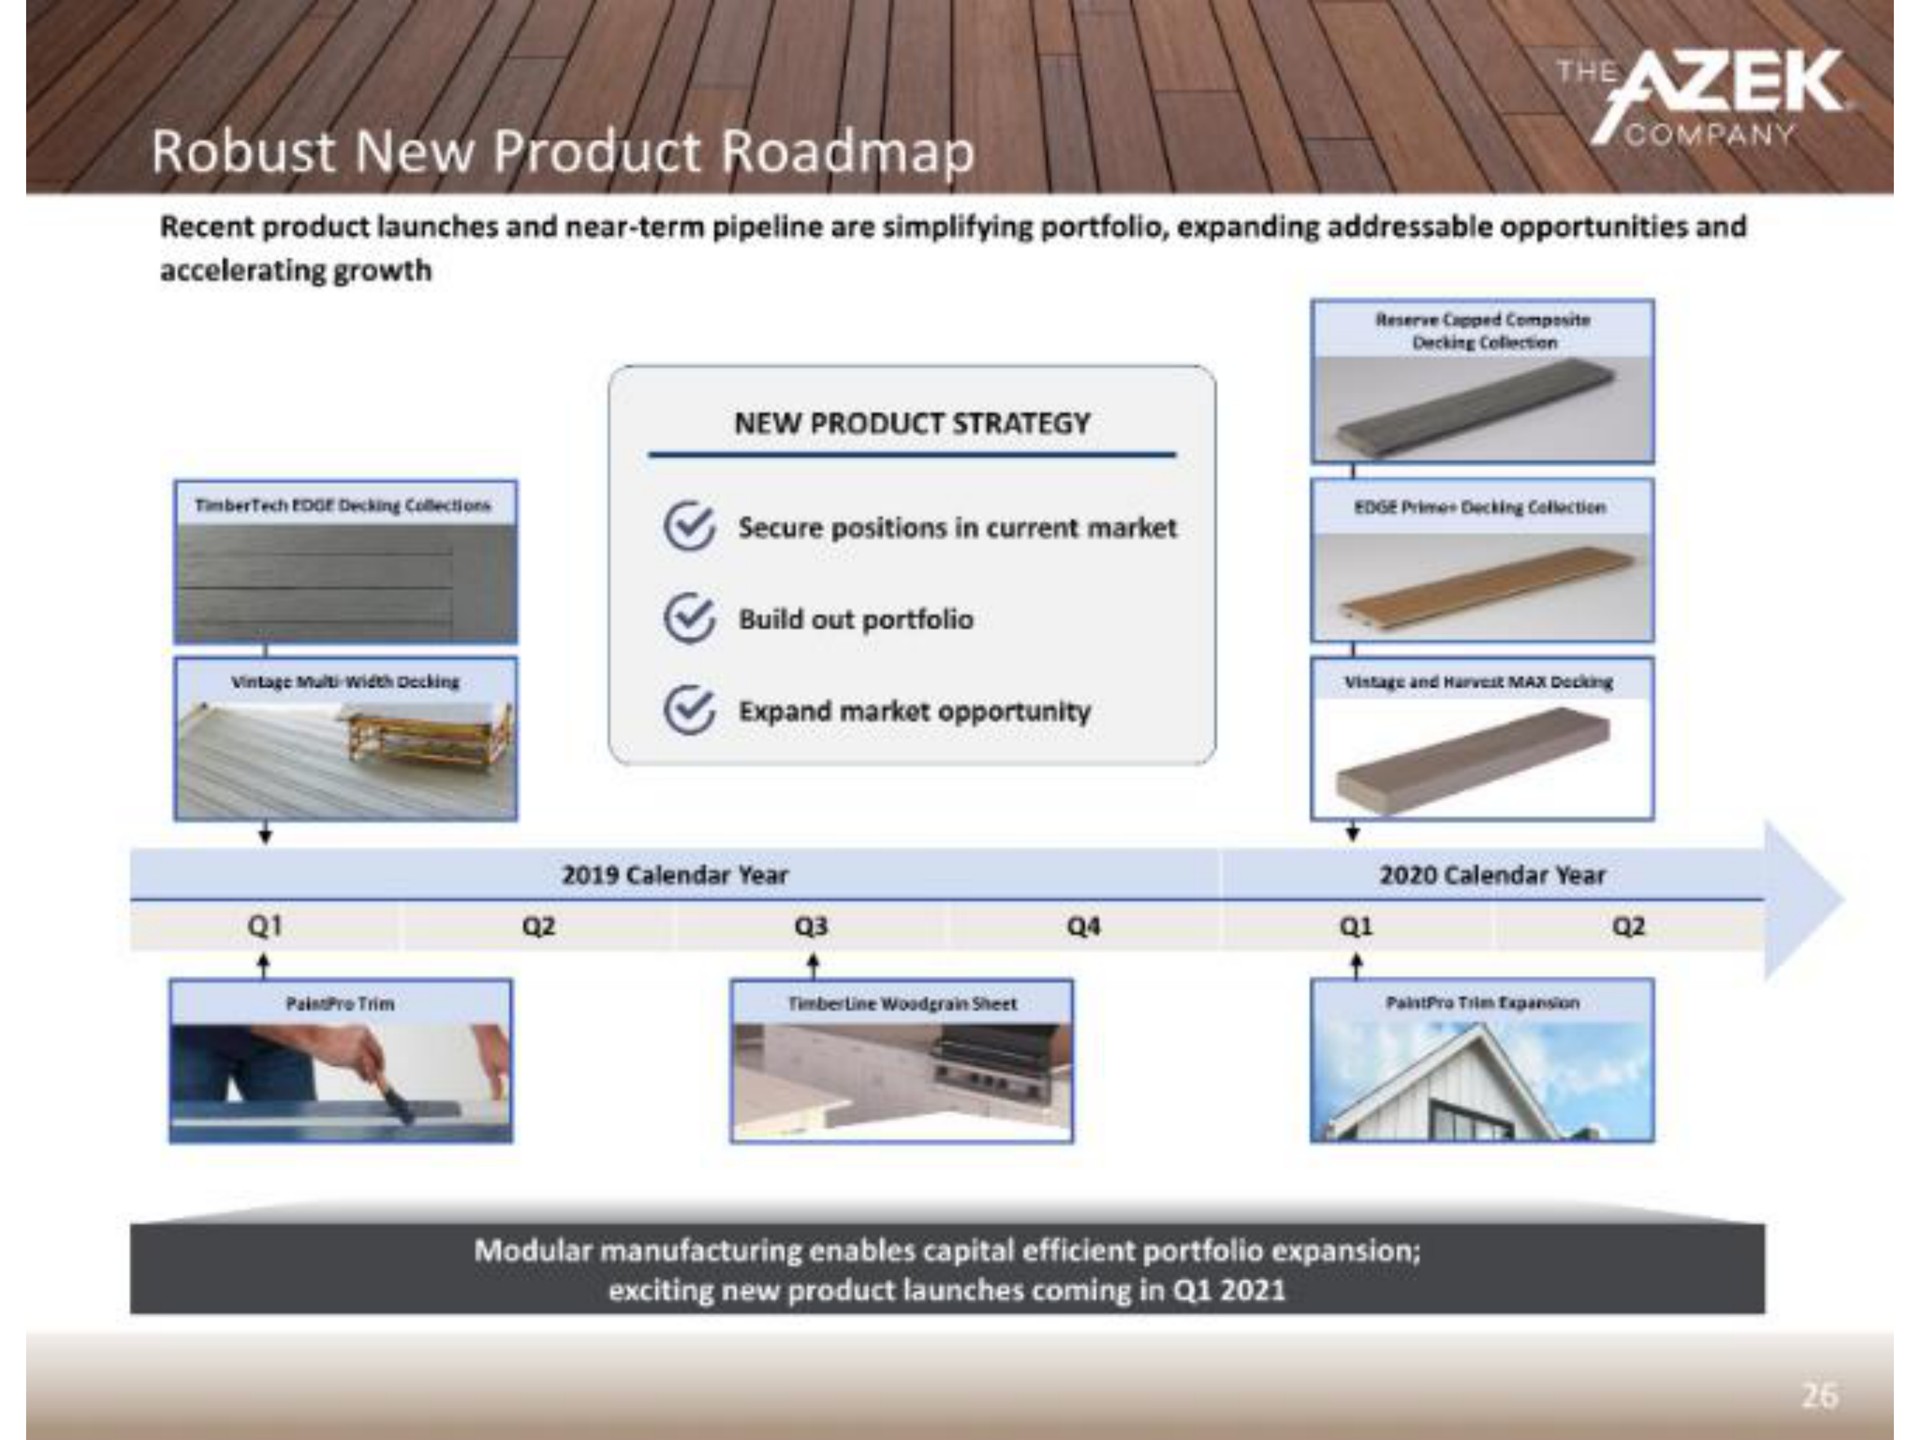 robust new product ore build out portfolio expand market opportunity | Azek